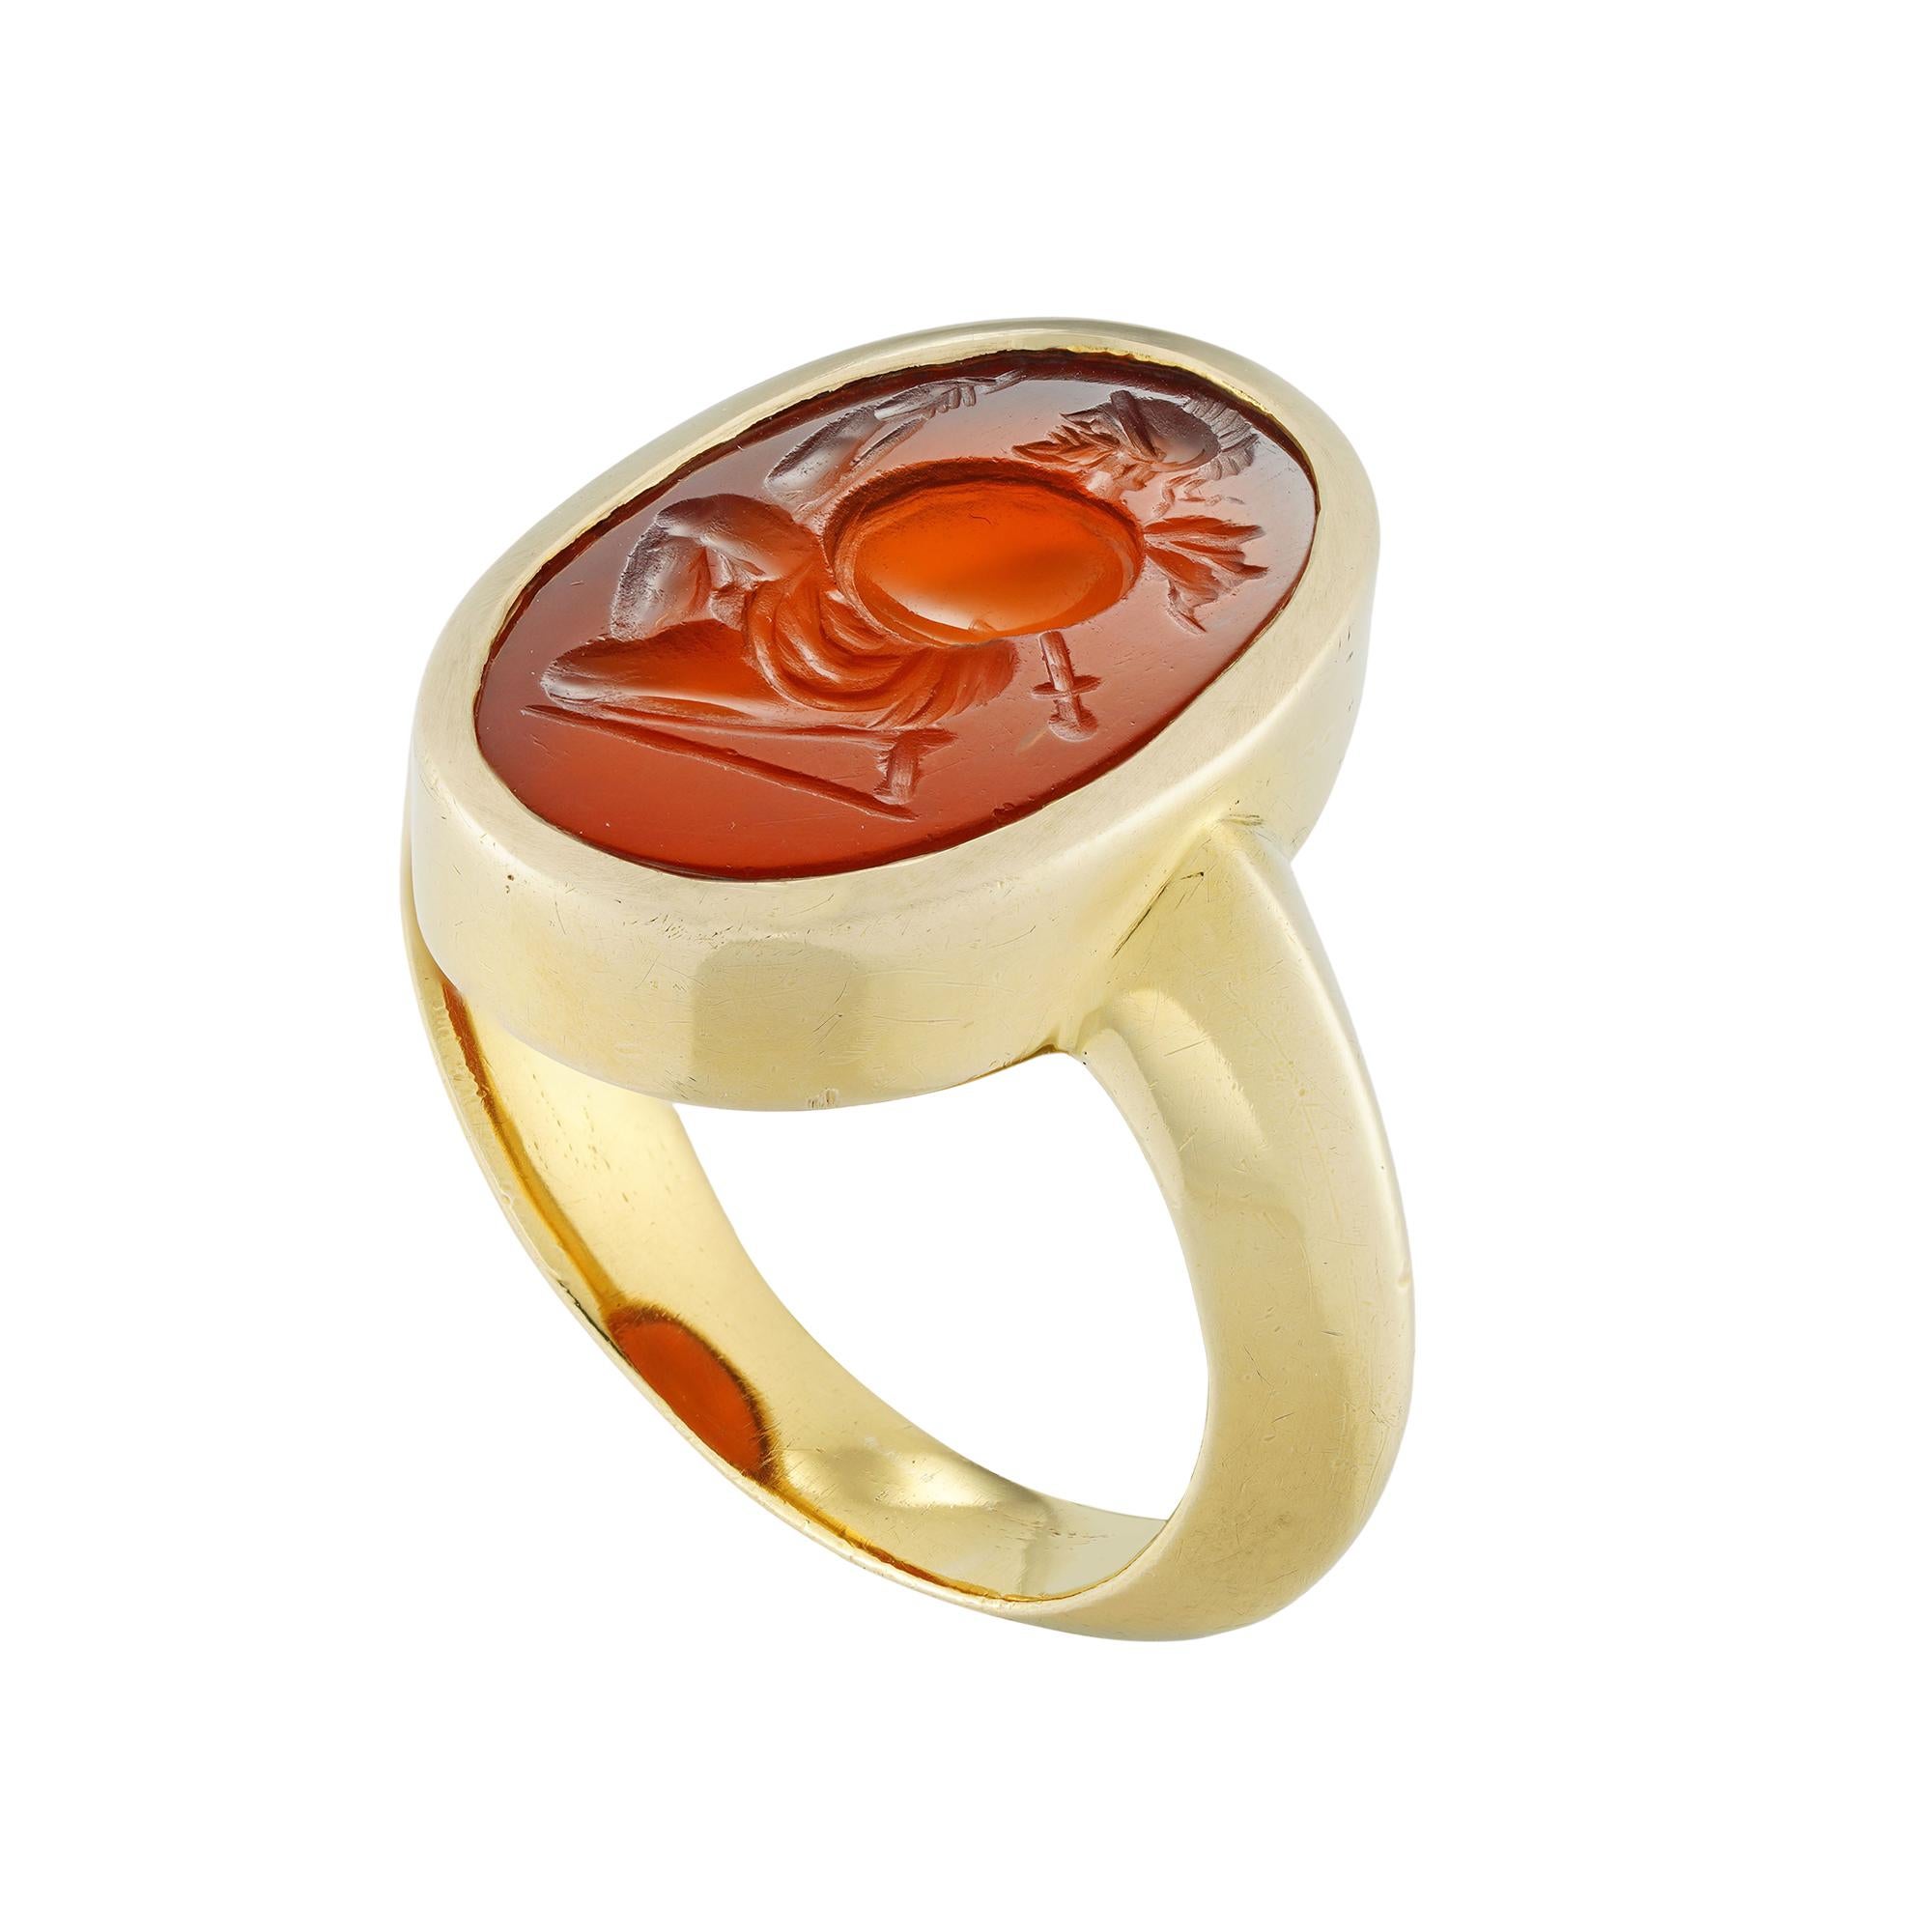 A Roman carnelian intaglio set in a yellow gold ring, the oval-shaped carnelian measuring approximately 18 x 12mm, depicting a kneeling ancient Greek warrior, wearing a helmet with plume, holding a spear and round shield, carved in 1st century BC -